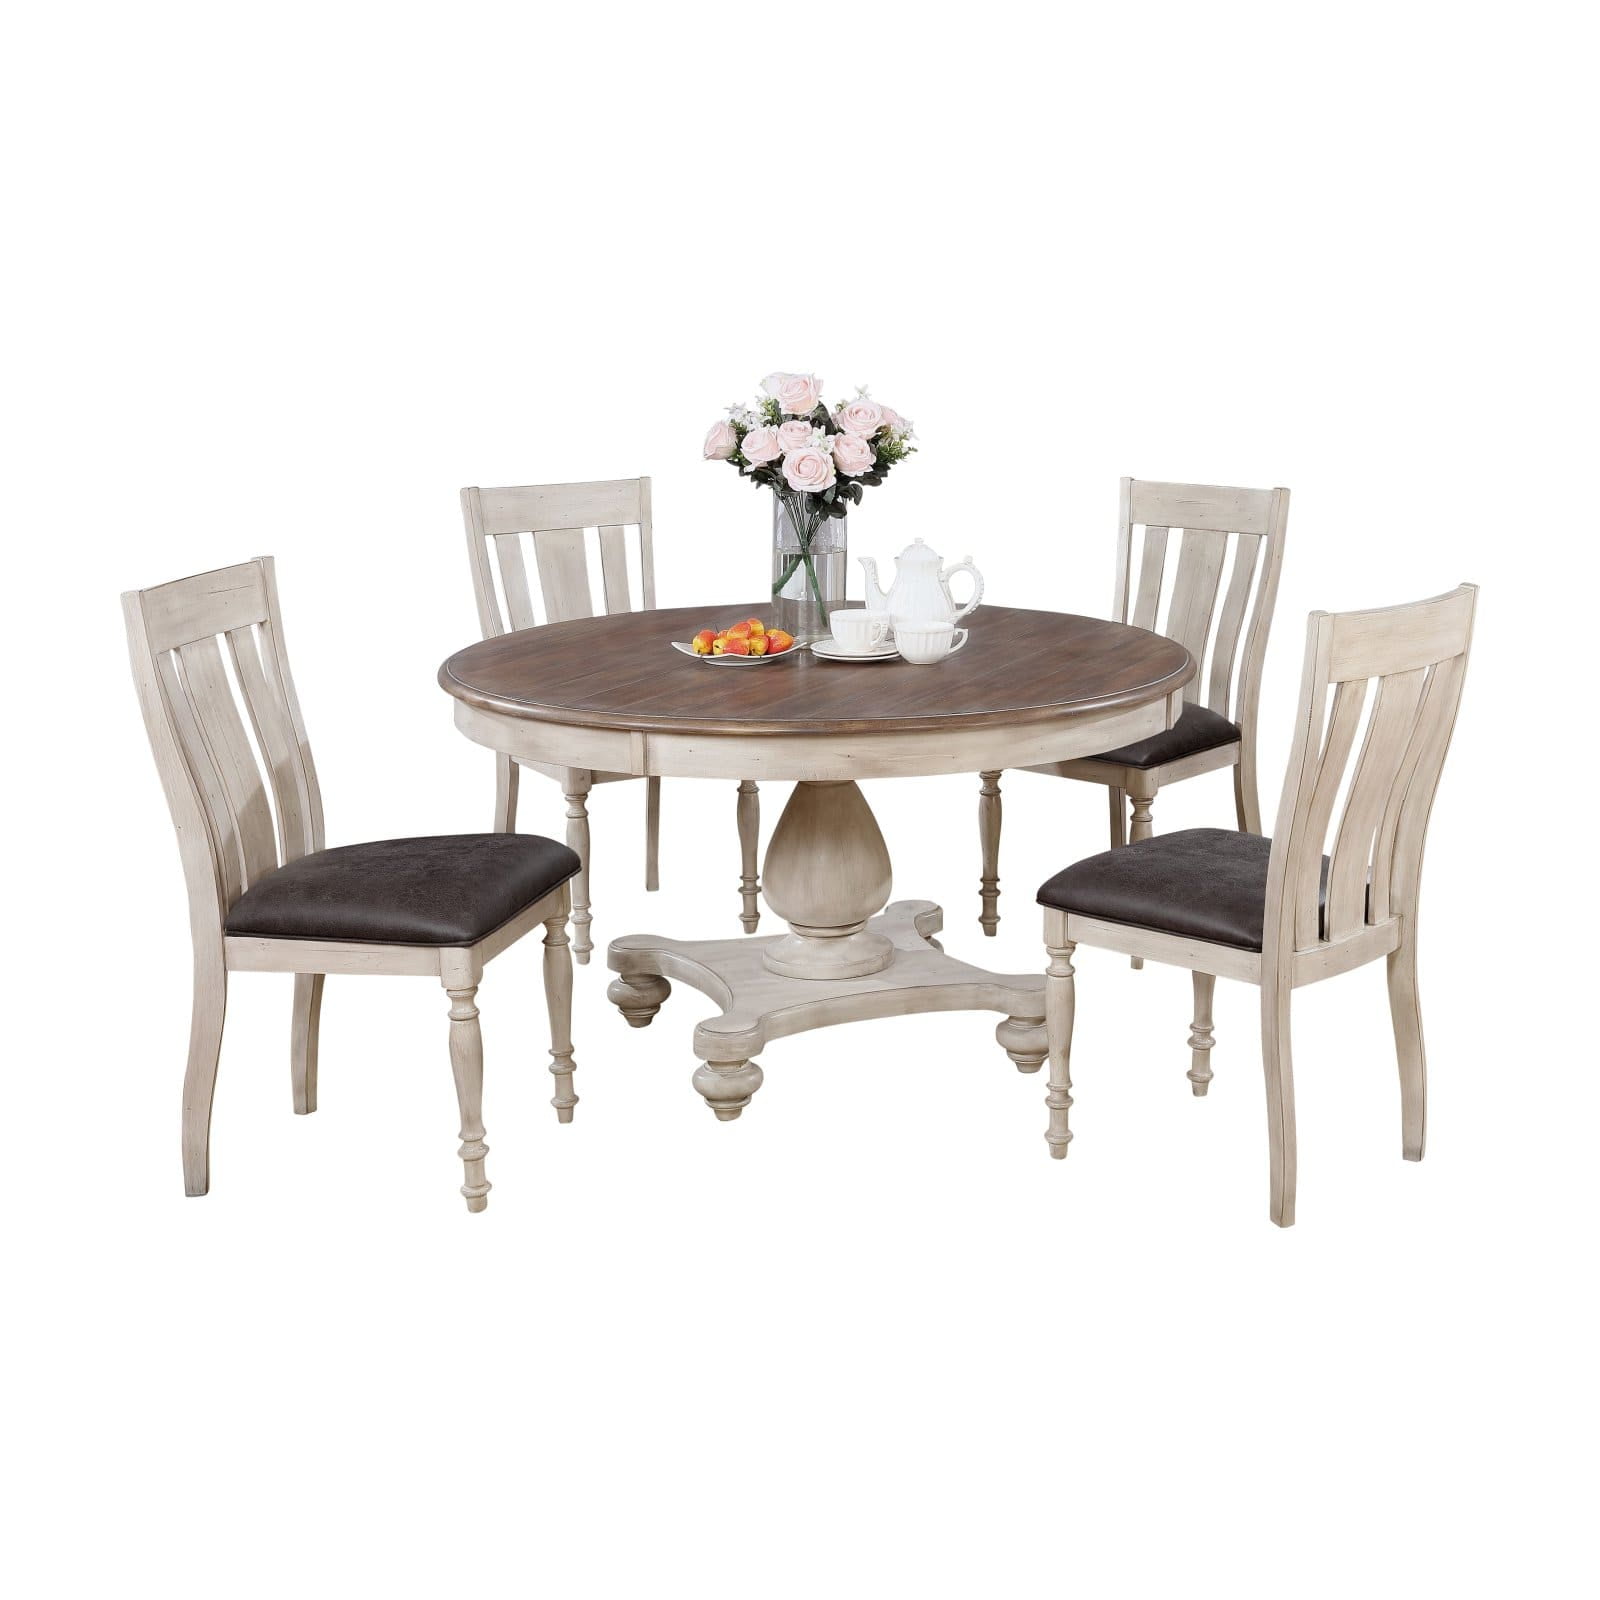 Arch Weathered Oak Dining Set Round, Round Dining Table Four Chairs